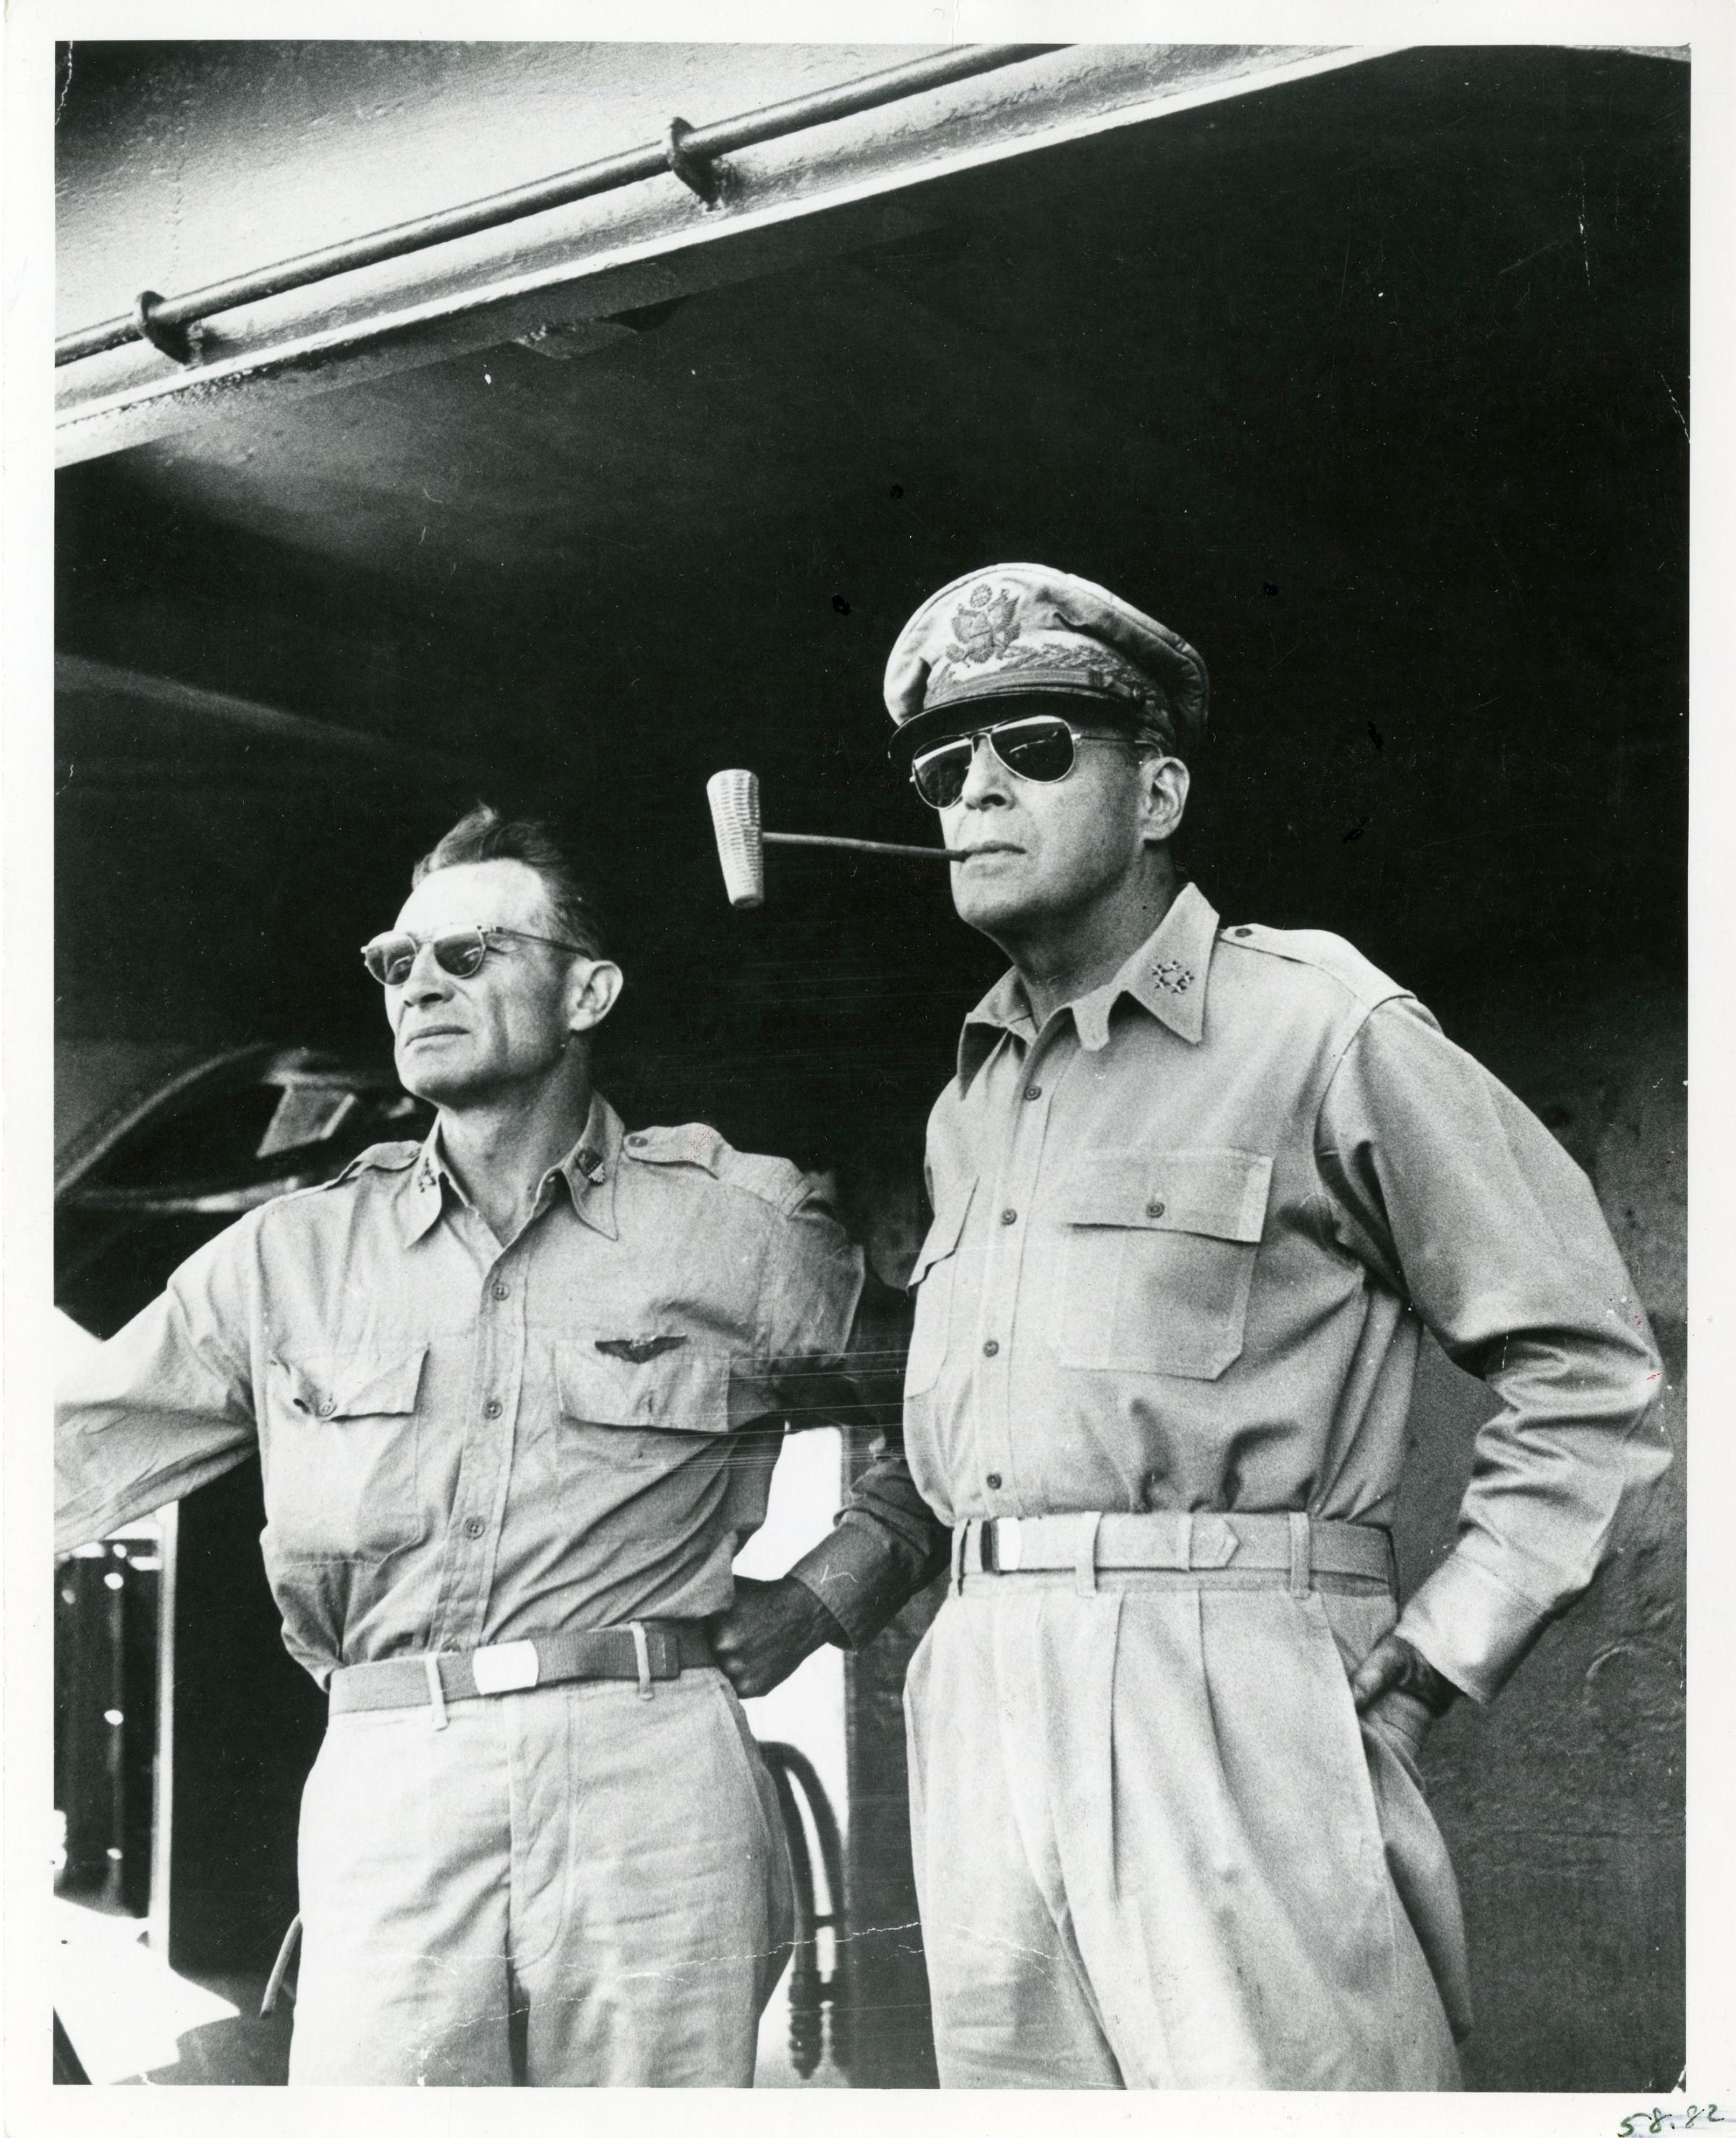 Text from the back of the print in LIFE's archives: "Gen. Douglas MacArthur smoking corn cob pipe on deck of ship w. aide Col. Lloyd Lehrbas, en route to USAF landing site at Lingayen Gulf in victorious ('I Shall Return') WWII return to Philippine Island site of earlier defeat."